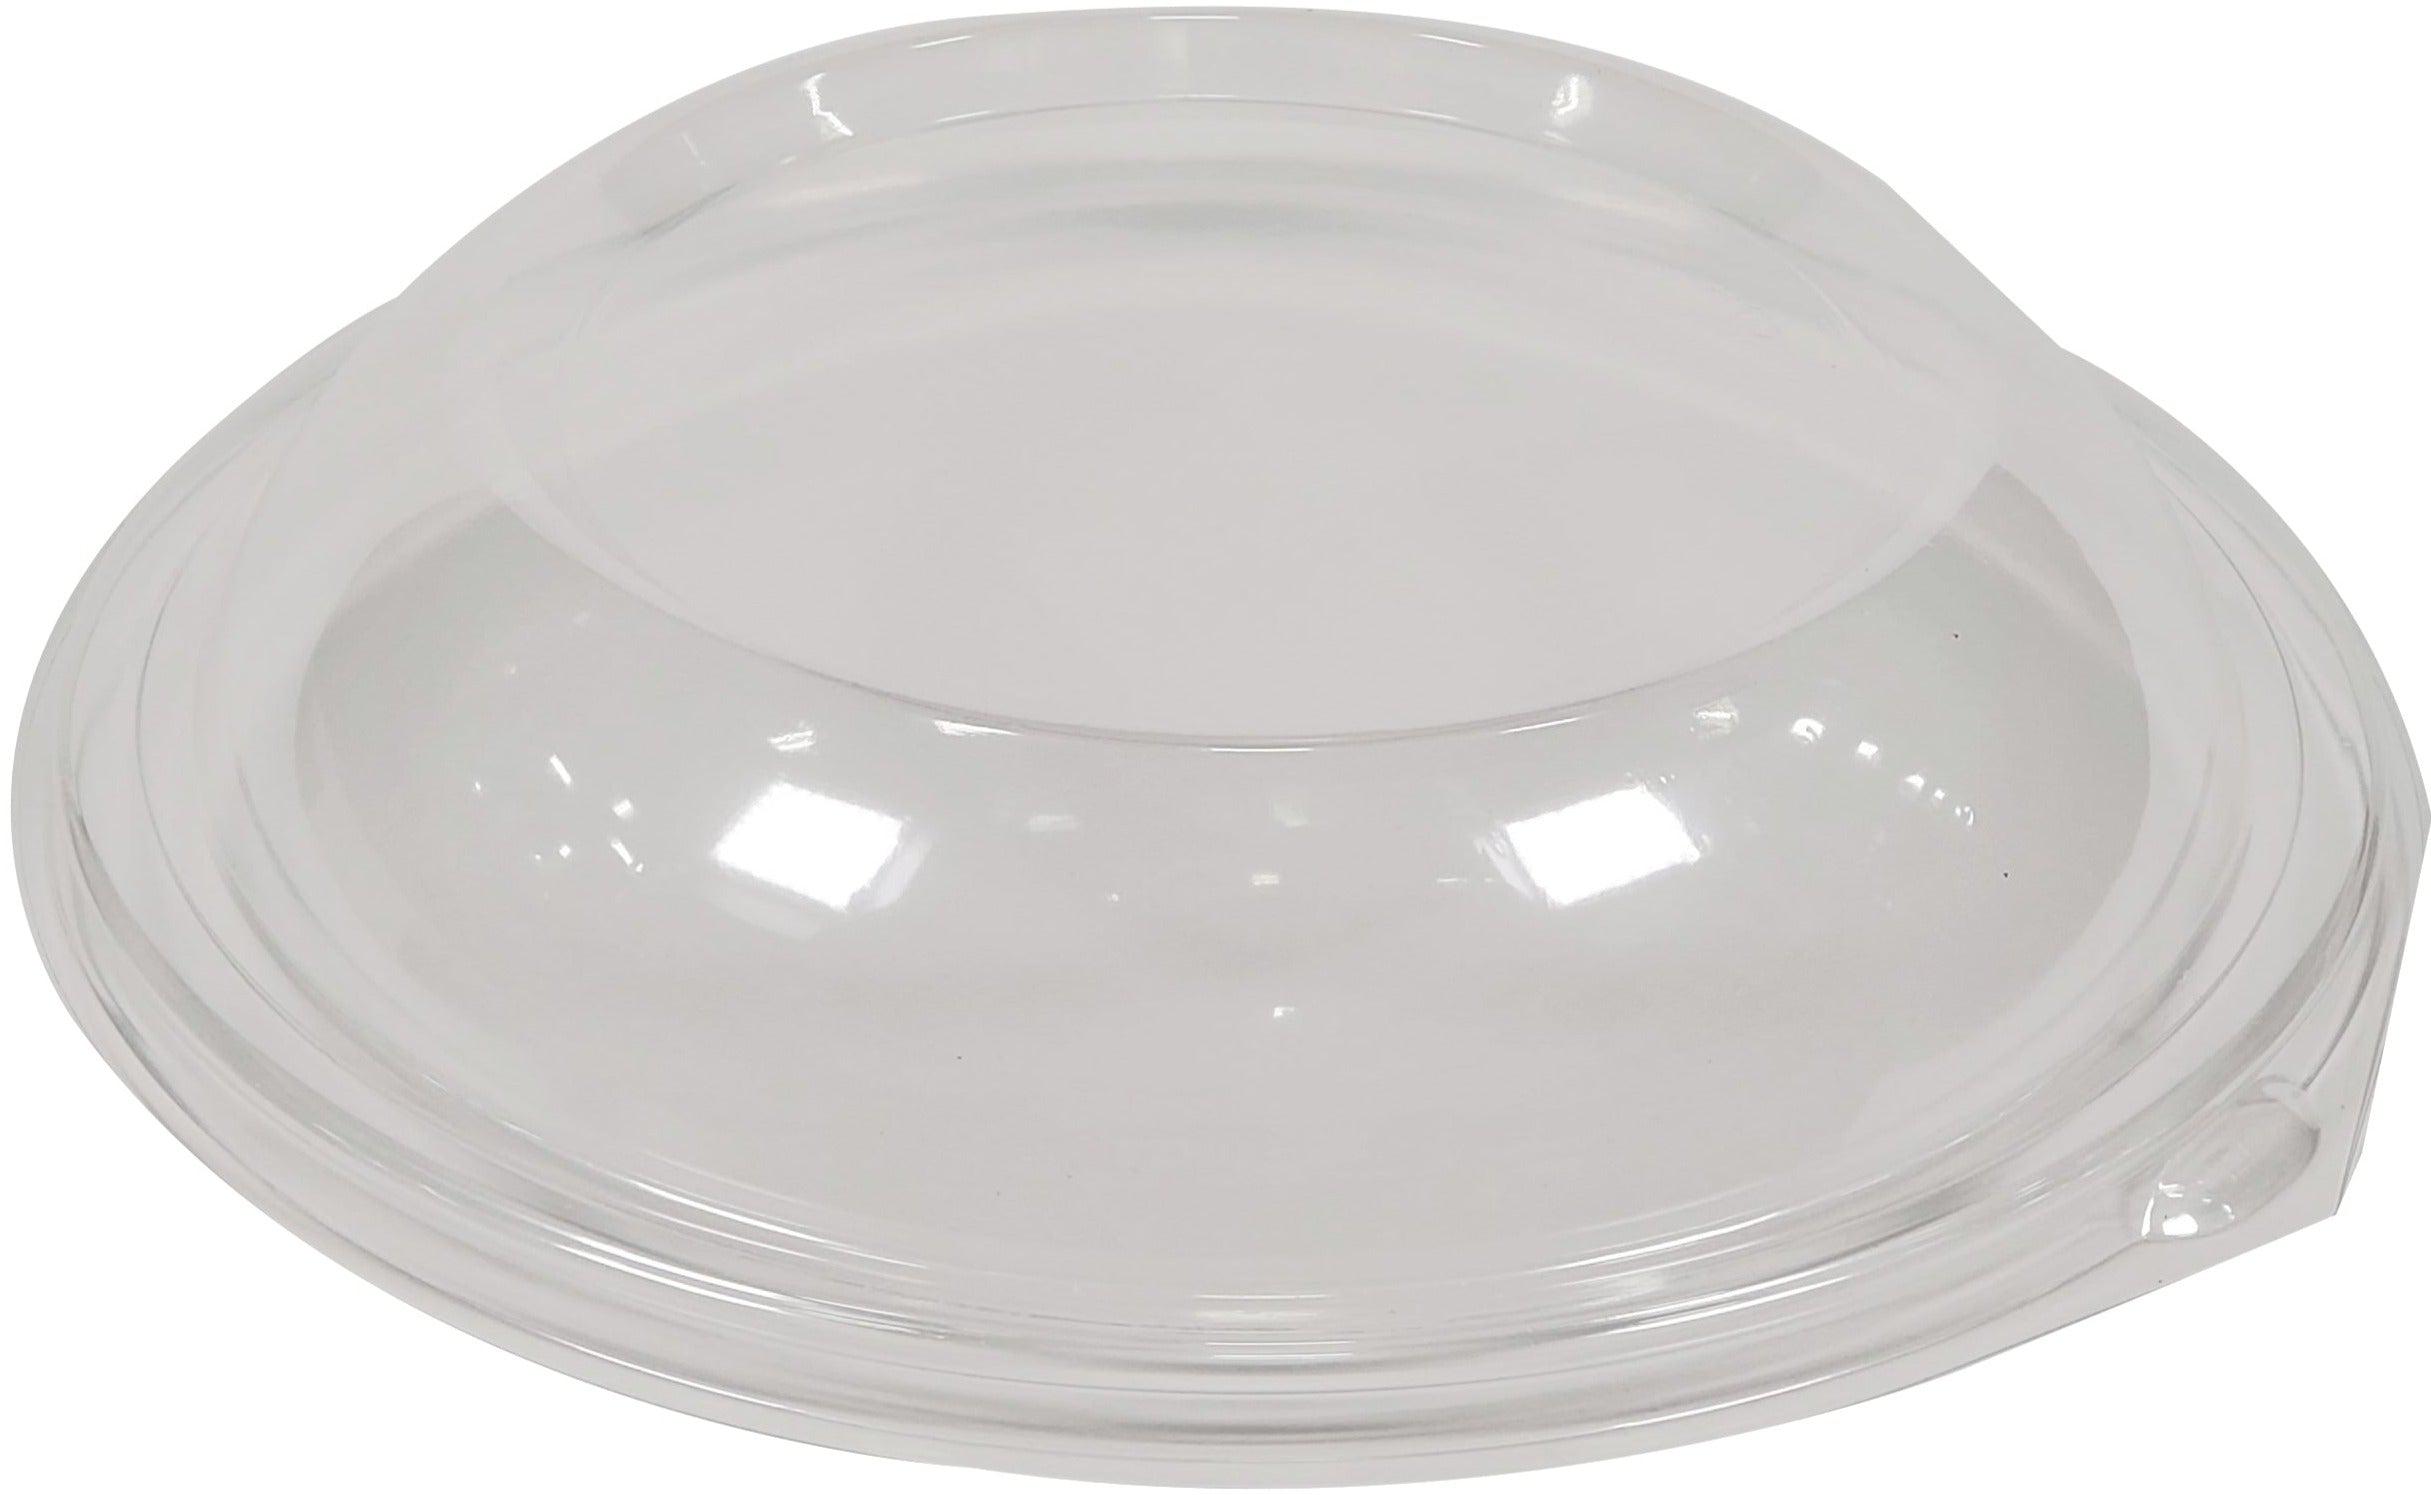 Pactiv Clear Dome Lid for 10 Foam Plates 10.25 - 0CI800100000